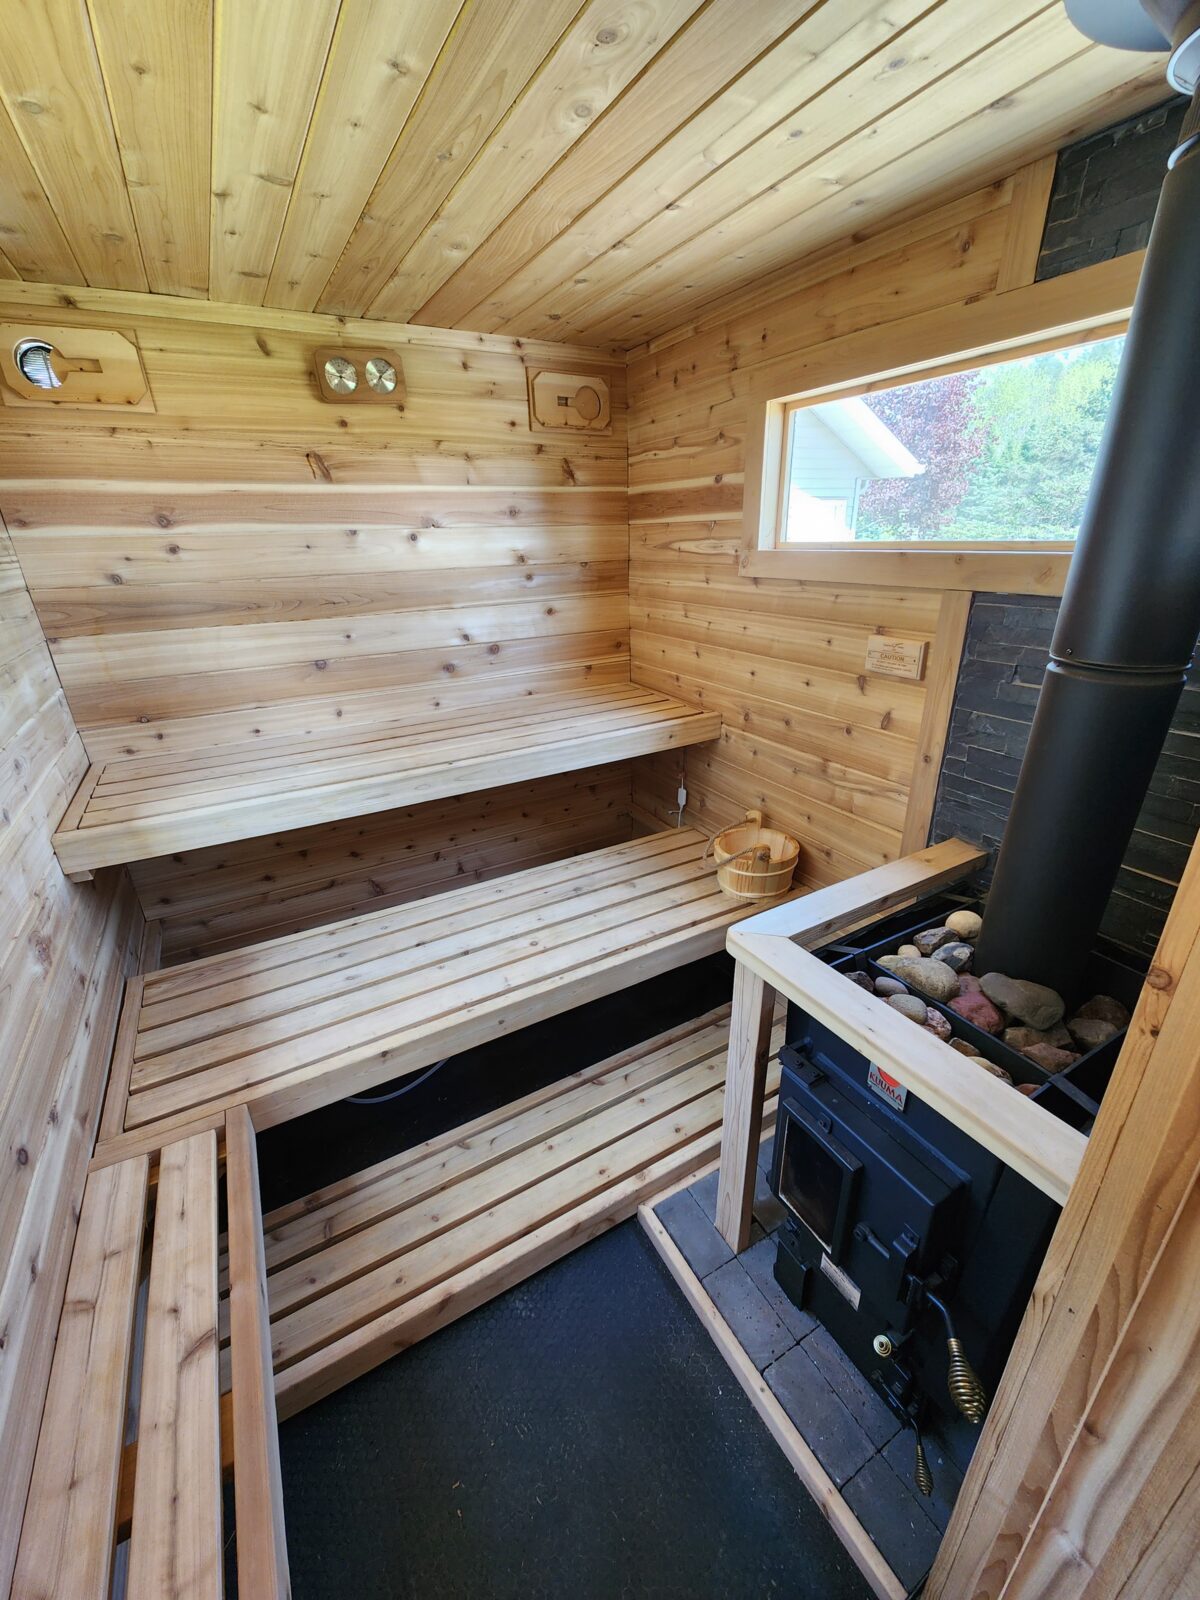 Hot Room Of A Voyageur Mobile Sauna For Sale Used Scaled